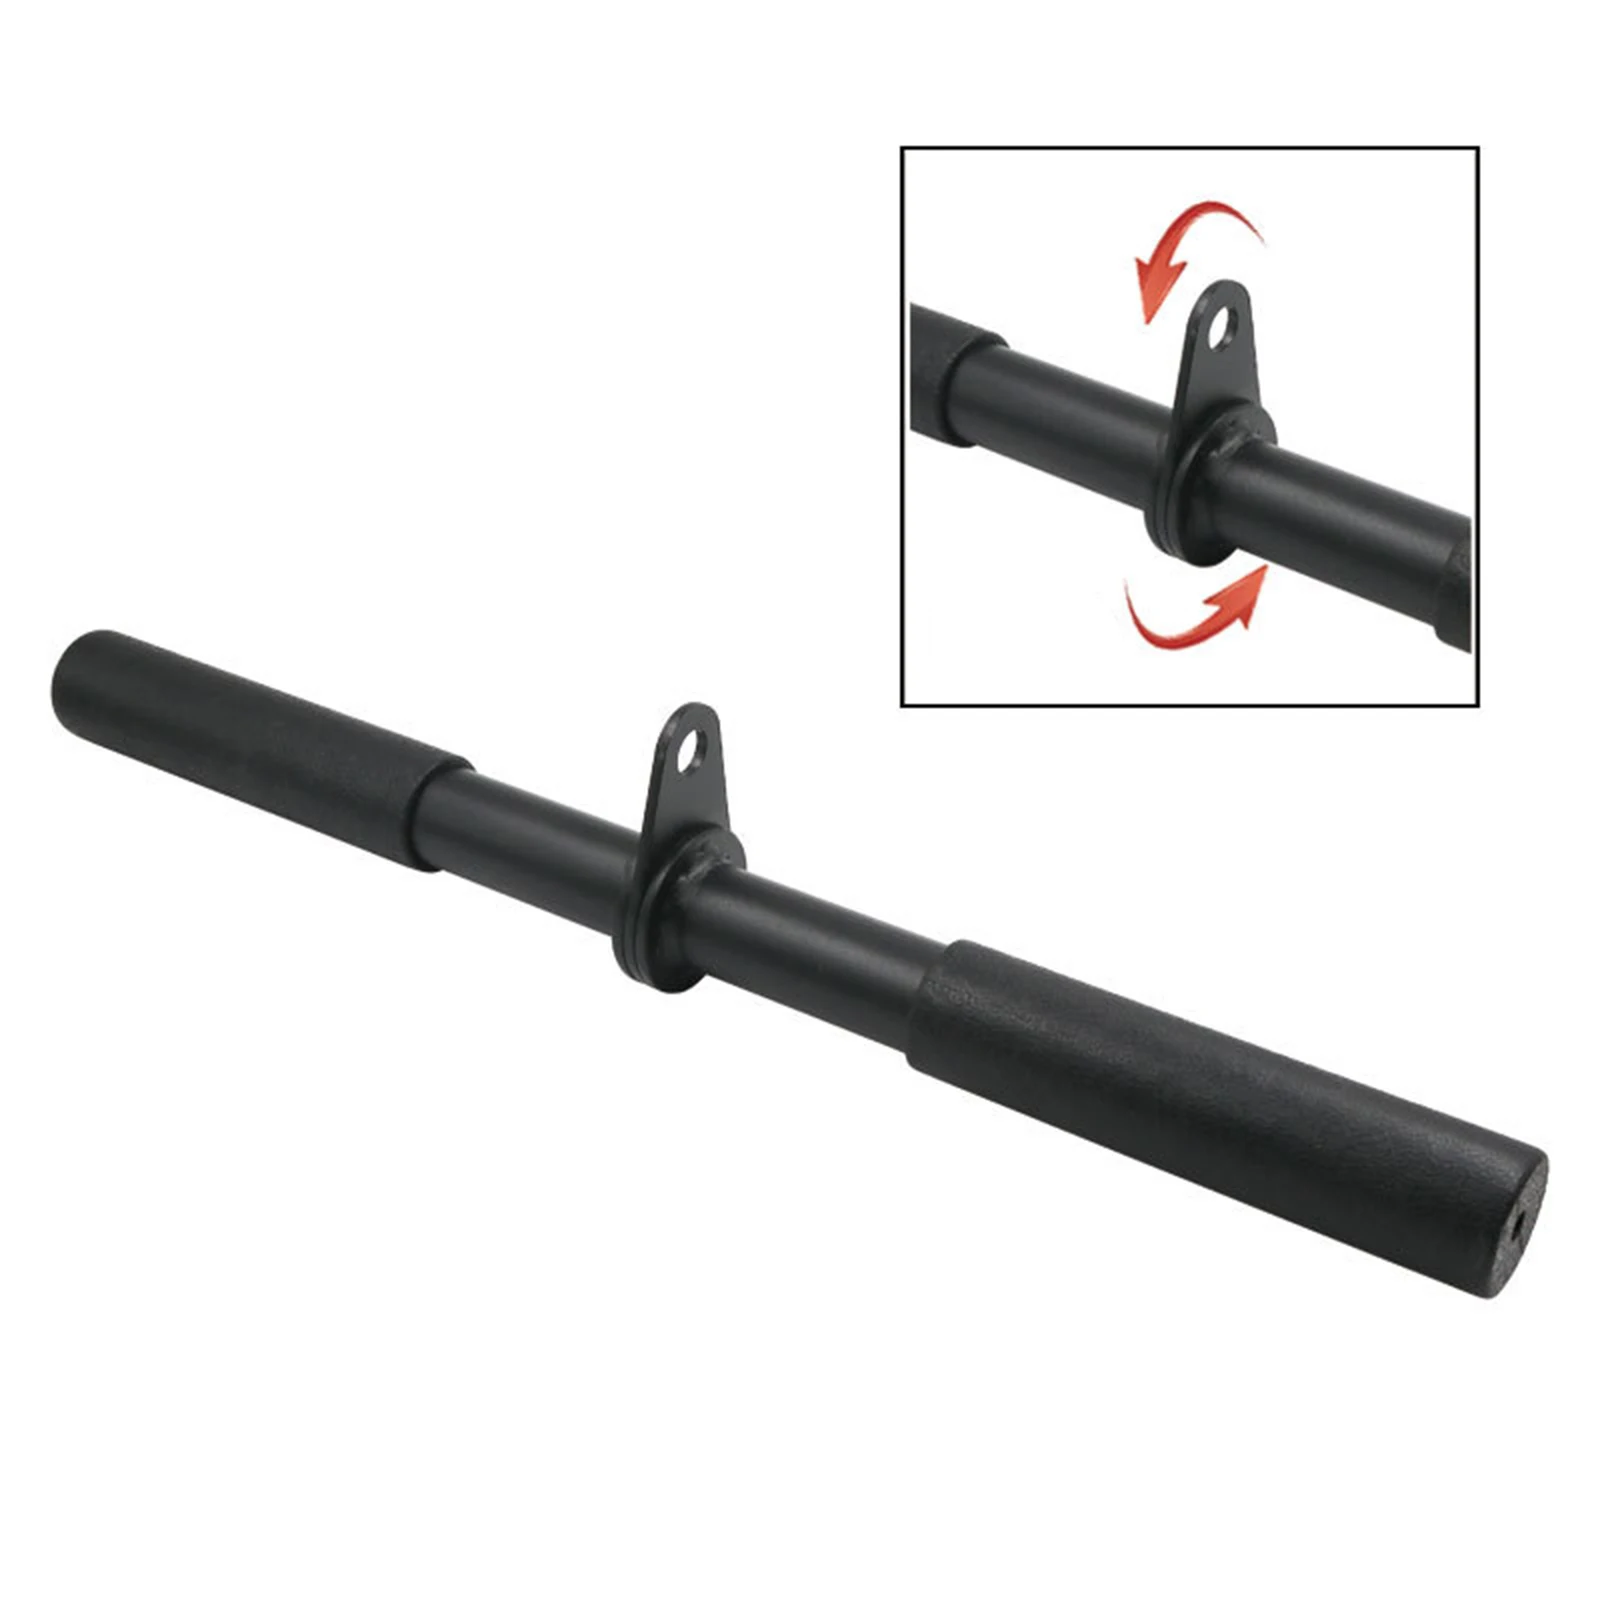 Revolving Straight Bar LAT High Pull Down Bar Cable Anti-Slip Attachment Strength Training Equipment For Gym Rowing Rod